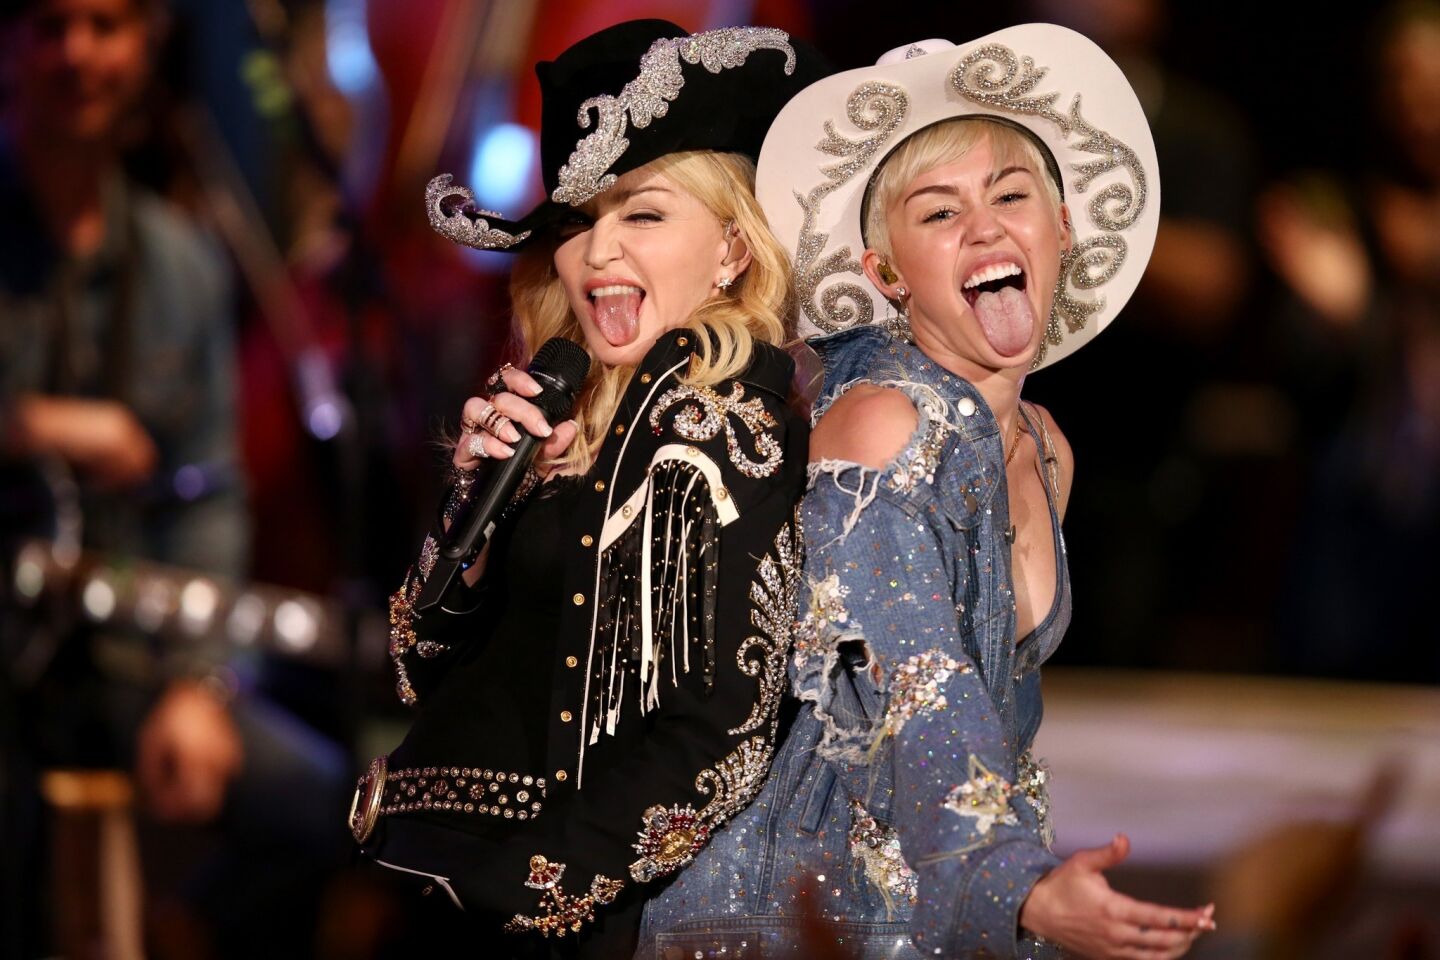 Miley teamed up with Madonna for MTV's "Unplugged," a show that's proved anything can happen onstage. Bringing some country flair to her routine, Miley entertained the audience with her usual antics -- tongue wagging, crotch grabbing and twerking. Still, it was impossible to ignore Miley's powerhouse voice, which lent itself to tracks off her chart-topping album "Bangerz." Near the end of the show, Madonna made a surprise appearance and the pair did their thing to Madge's high-energy hit "Don't Tell Me," which morphed into Miley's "We Can't Stop." It isn't called "Unplugged" for nothing.